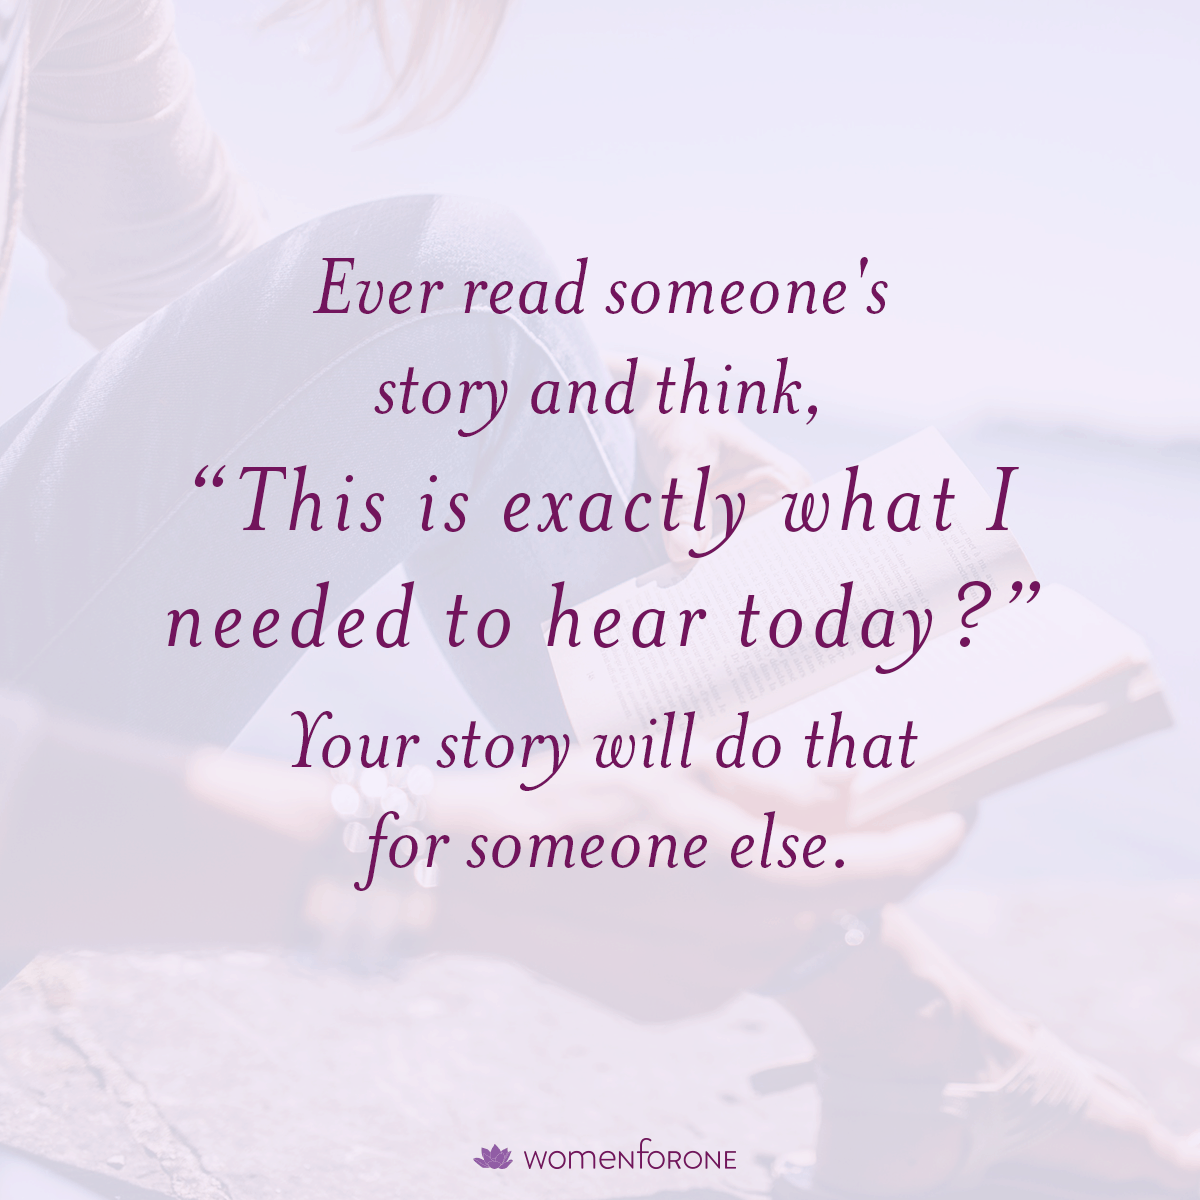 Ever read someone's story and think, "This is exactly what I needed to hear today"? Your story will do that for someone else.